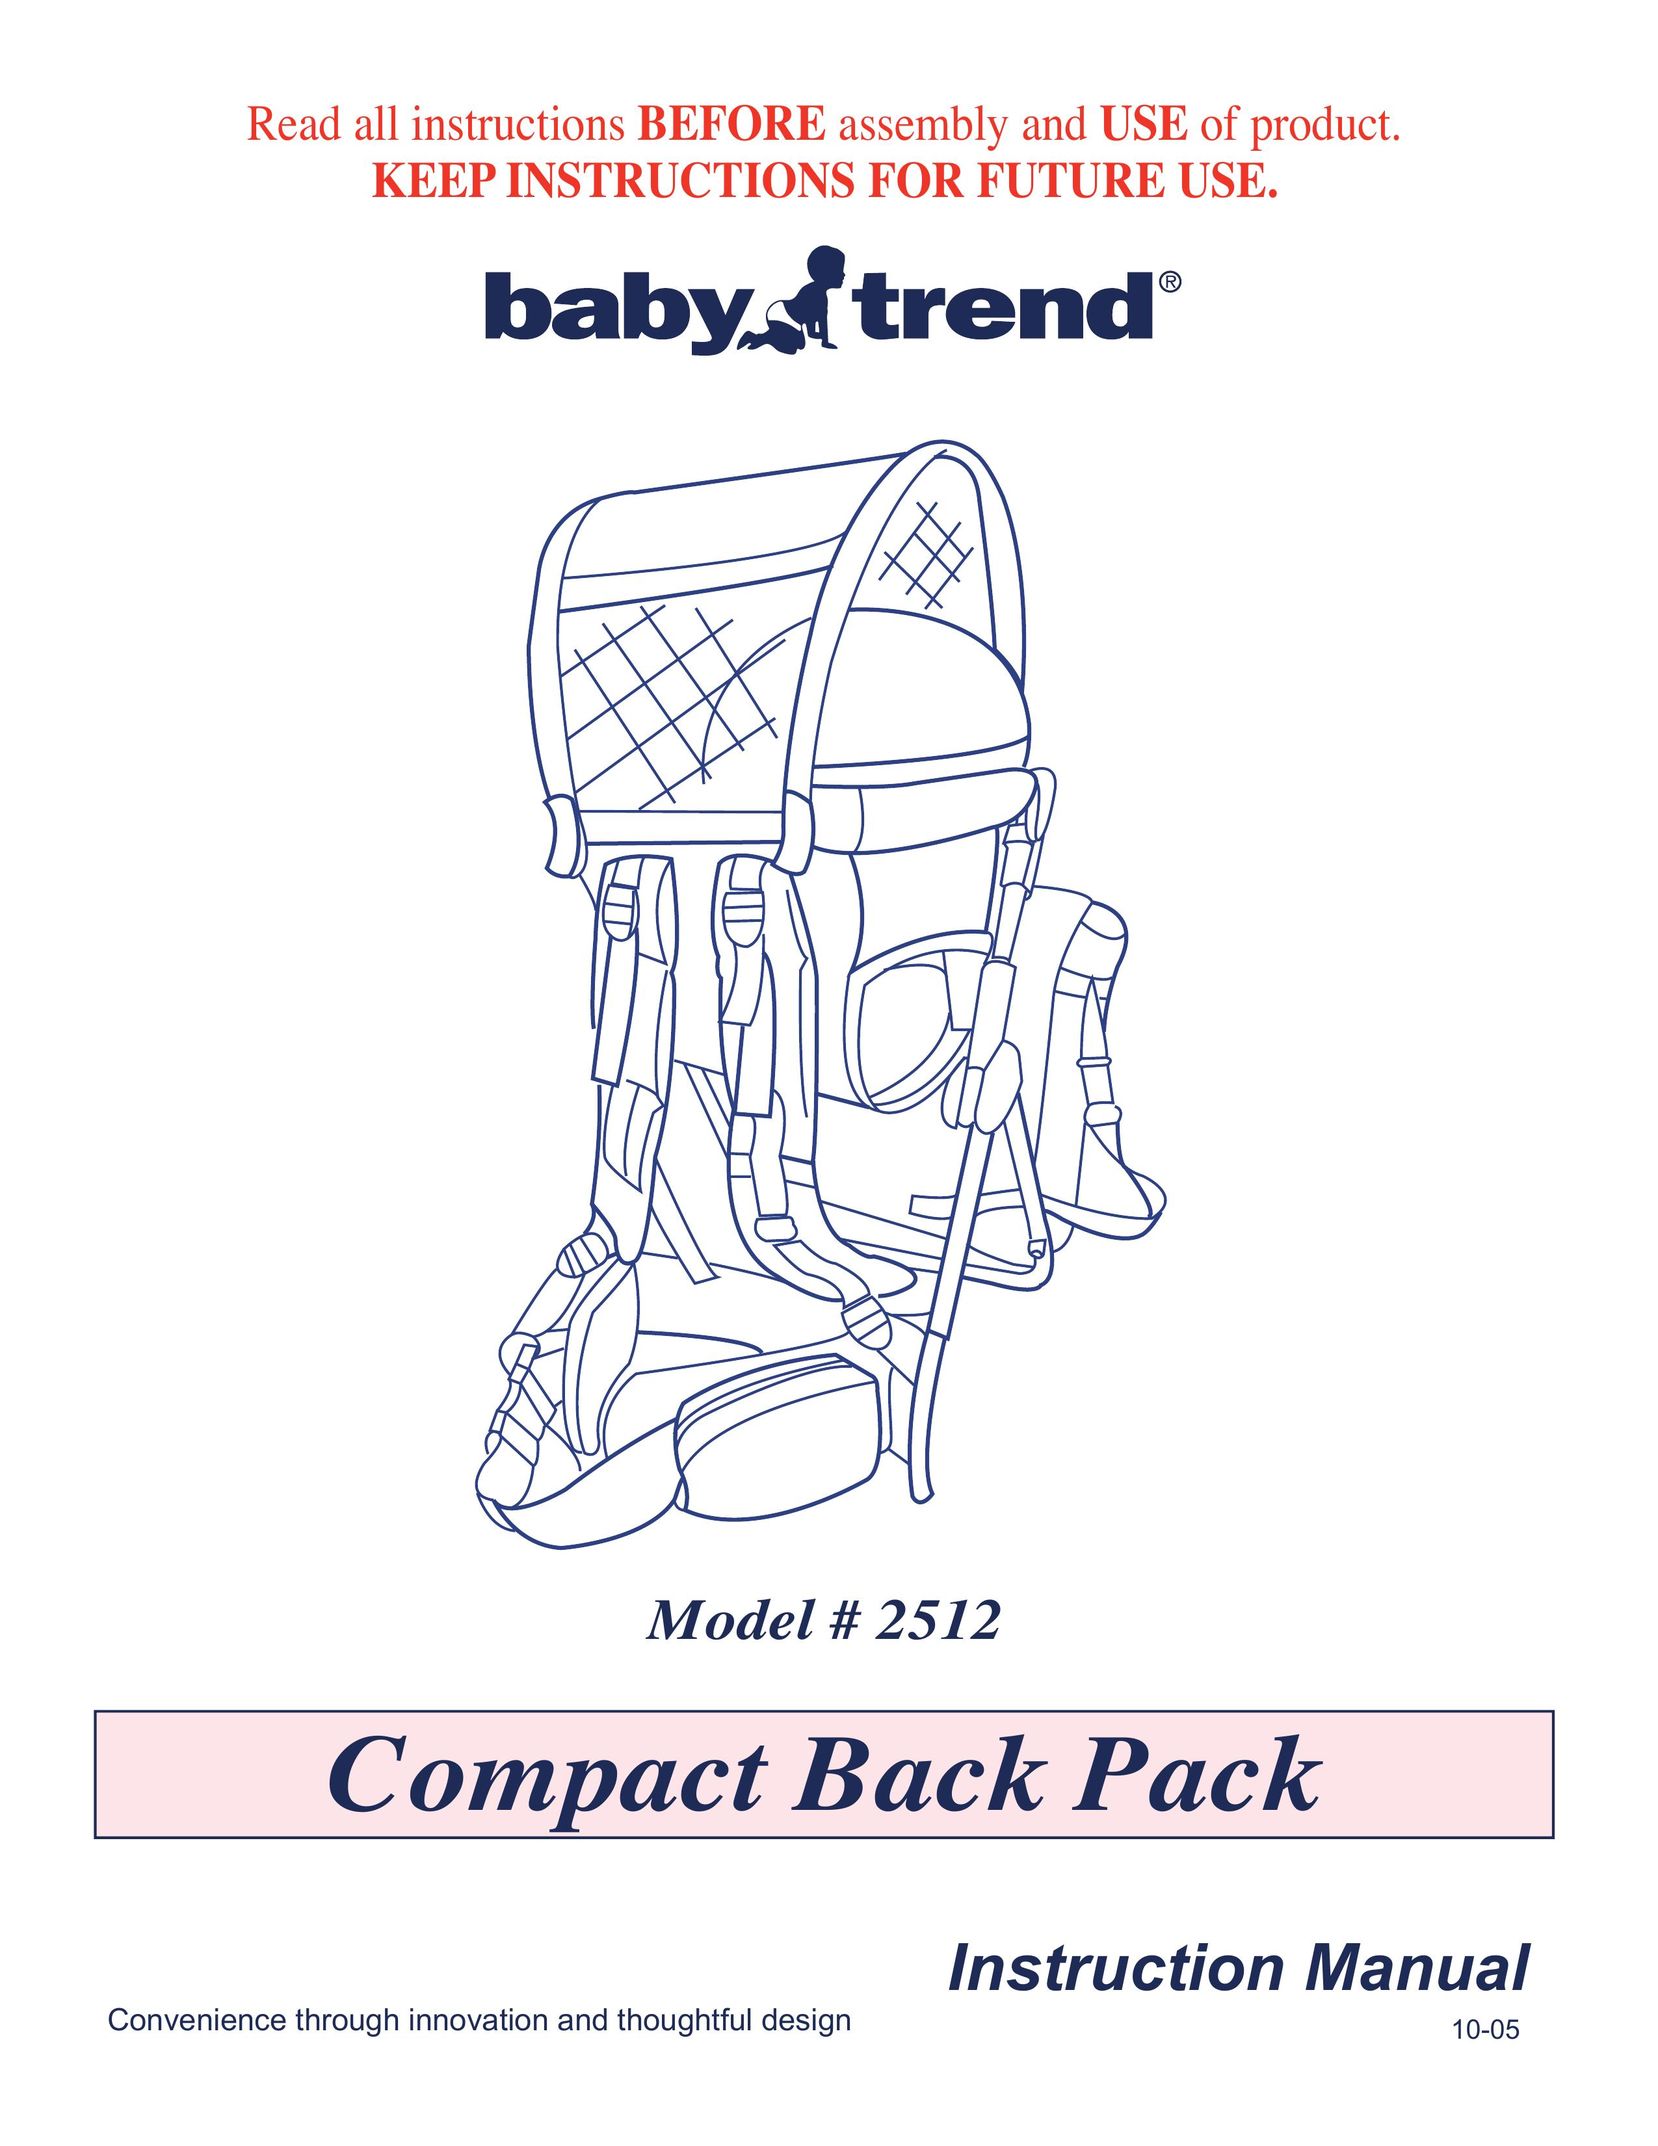 Baby Trend 2512 Baby Carrier User Manual (Page 1)